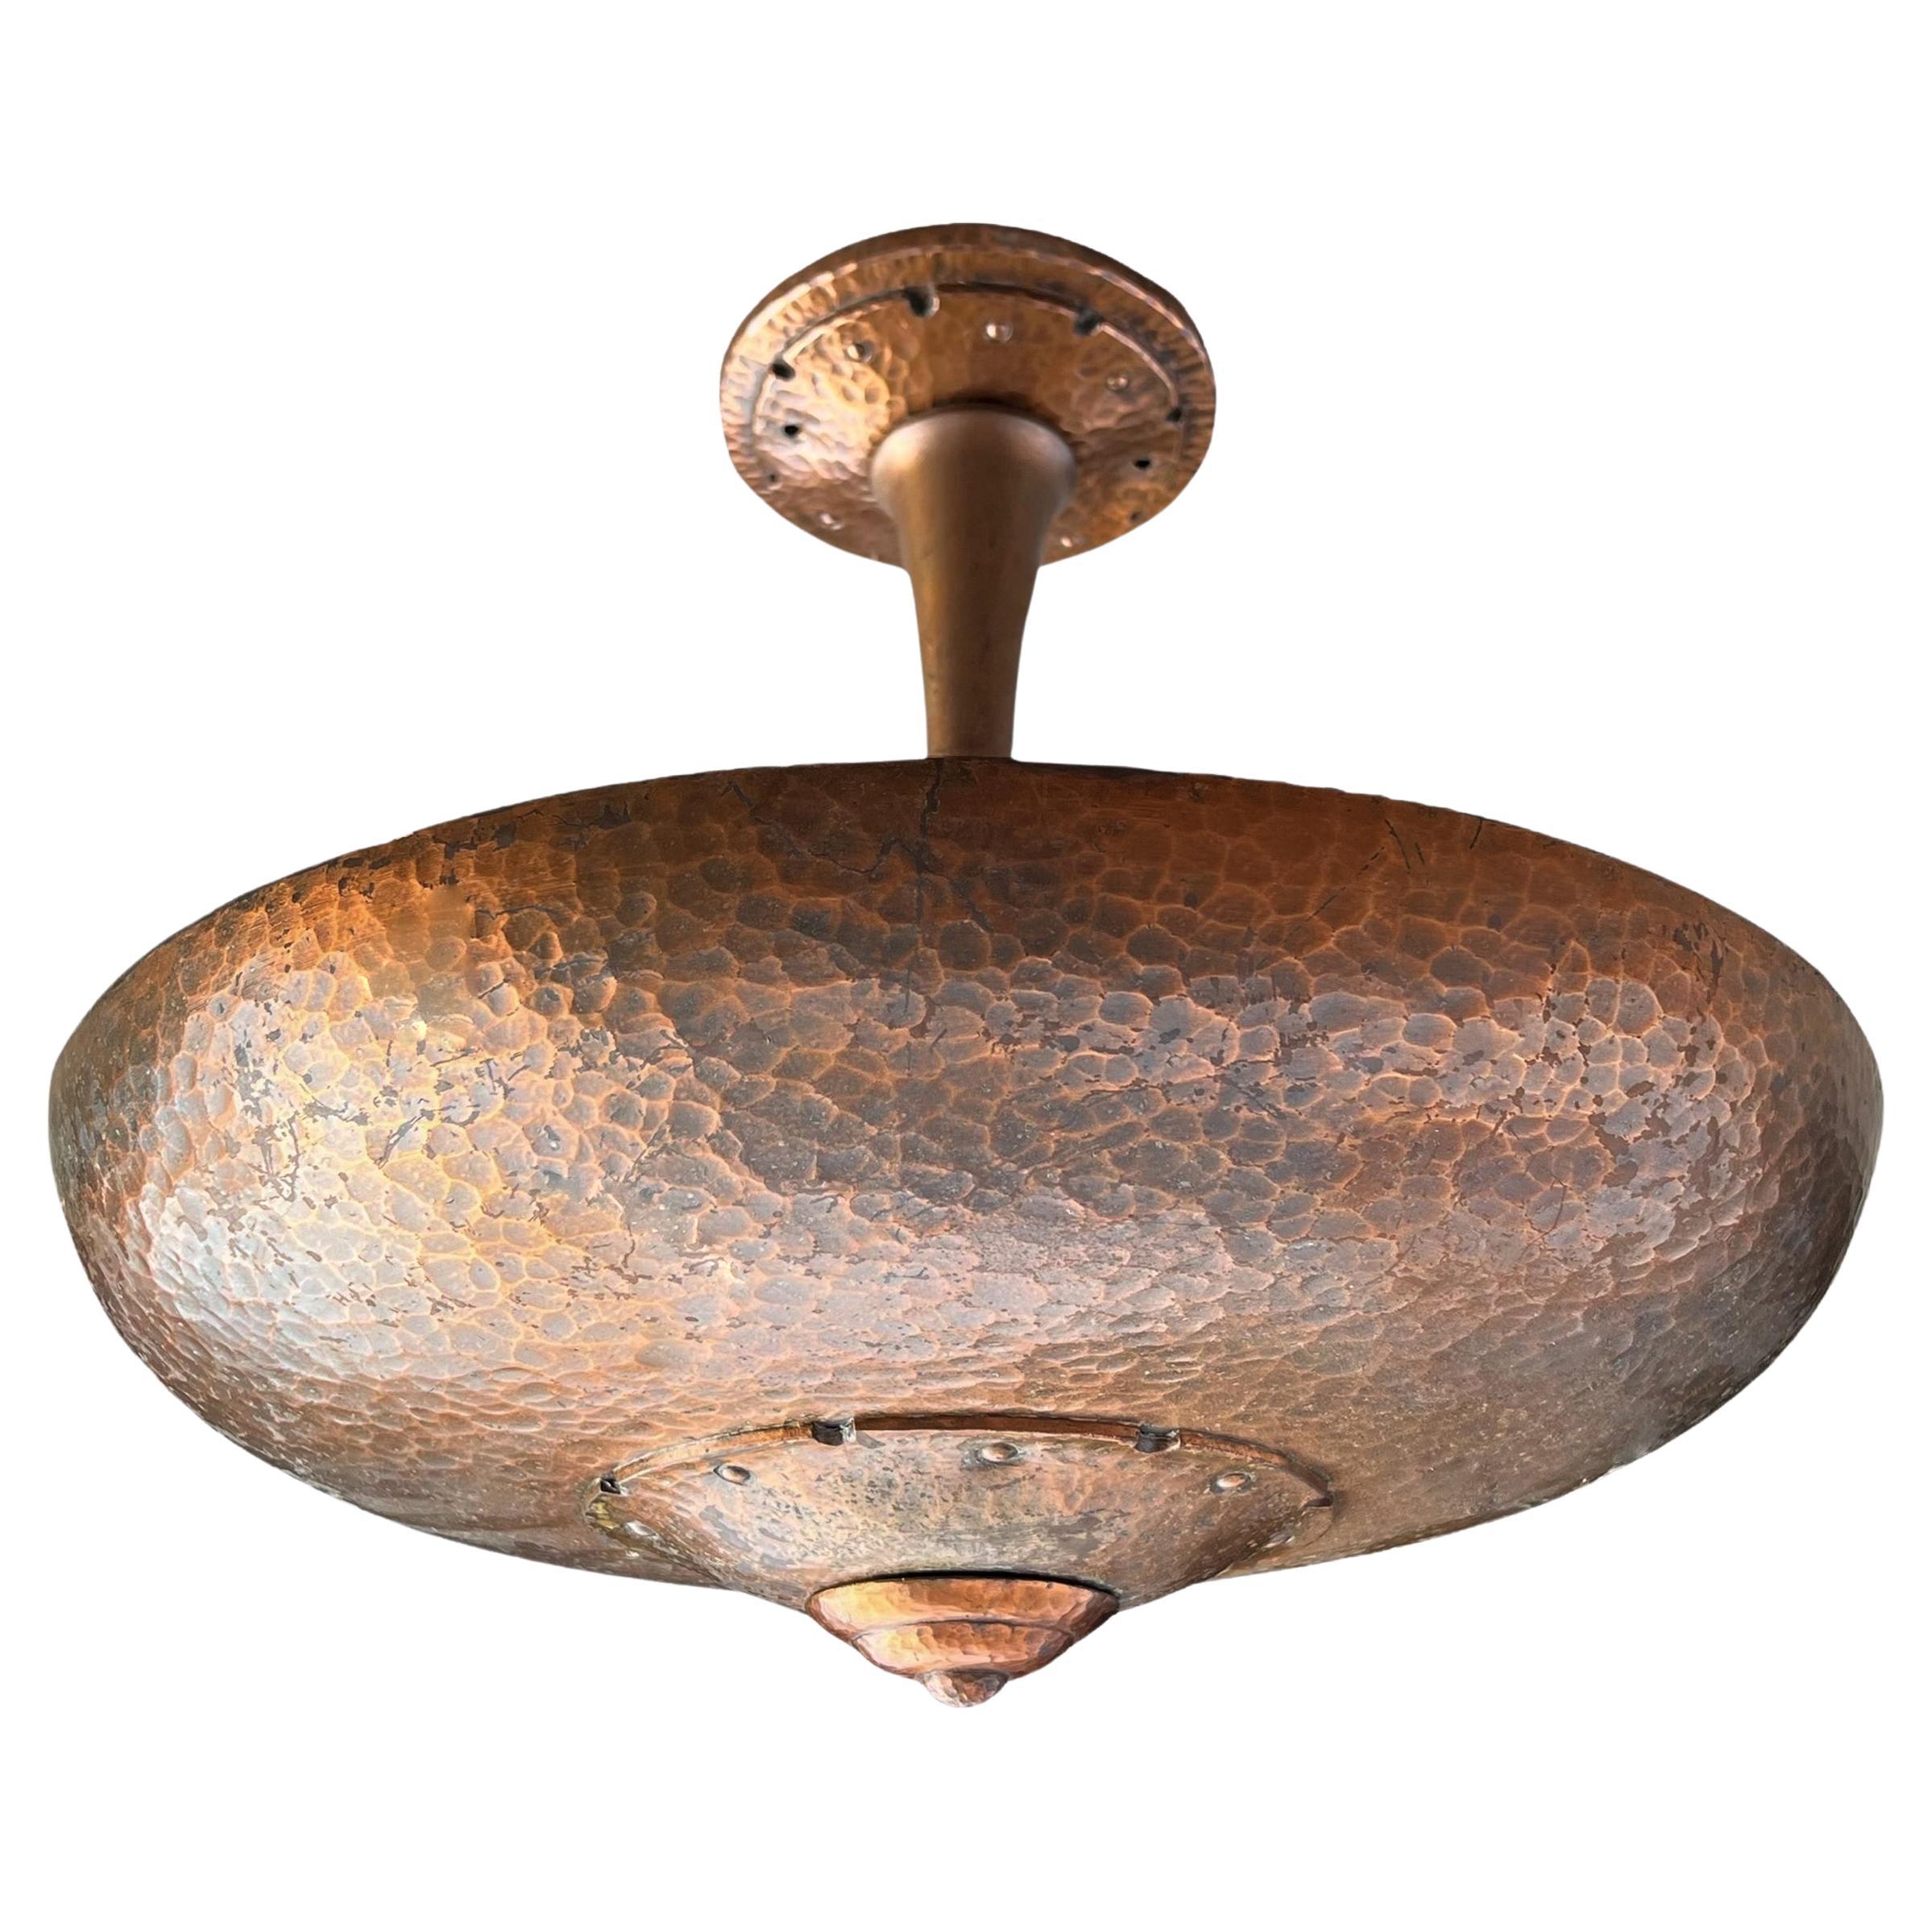 Early 20th Century American Art Deco Hammered Copper Light Fixture For Sale